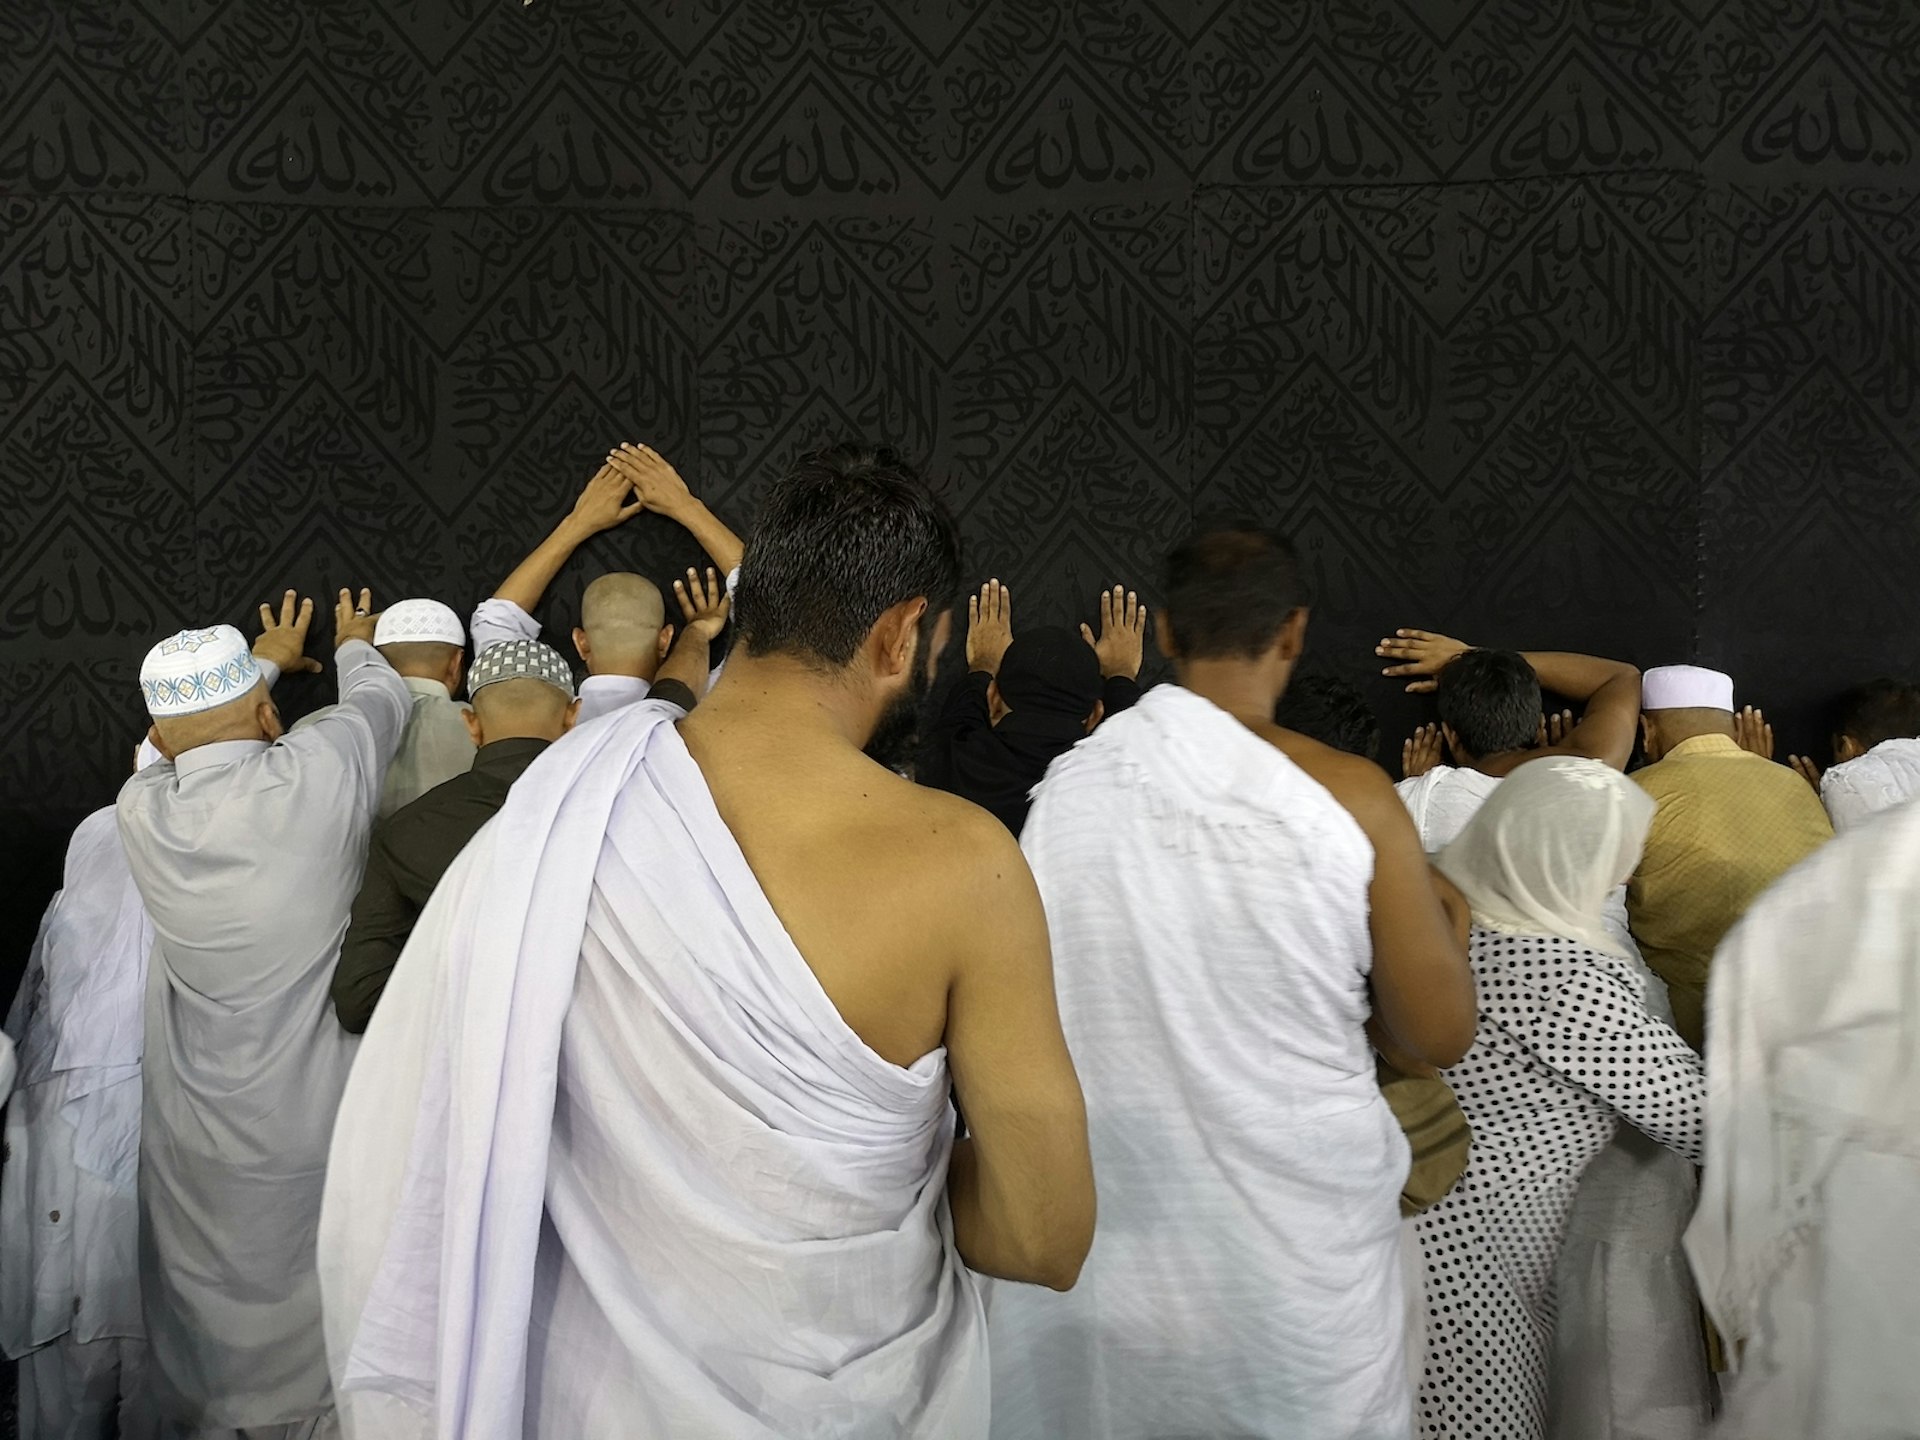 A group of people worshipping at the Kaaba, most are dressed in white and all are facing towards the Kaaba in worship. Hajj diaries